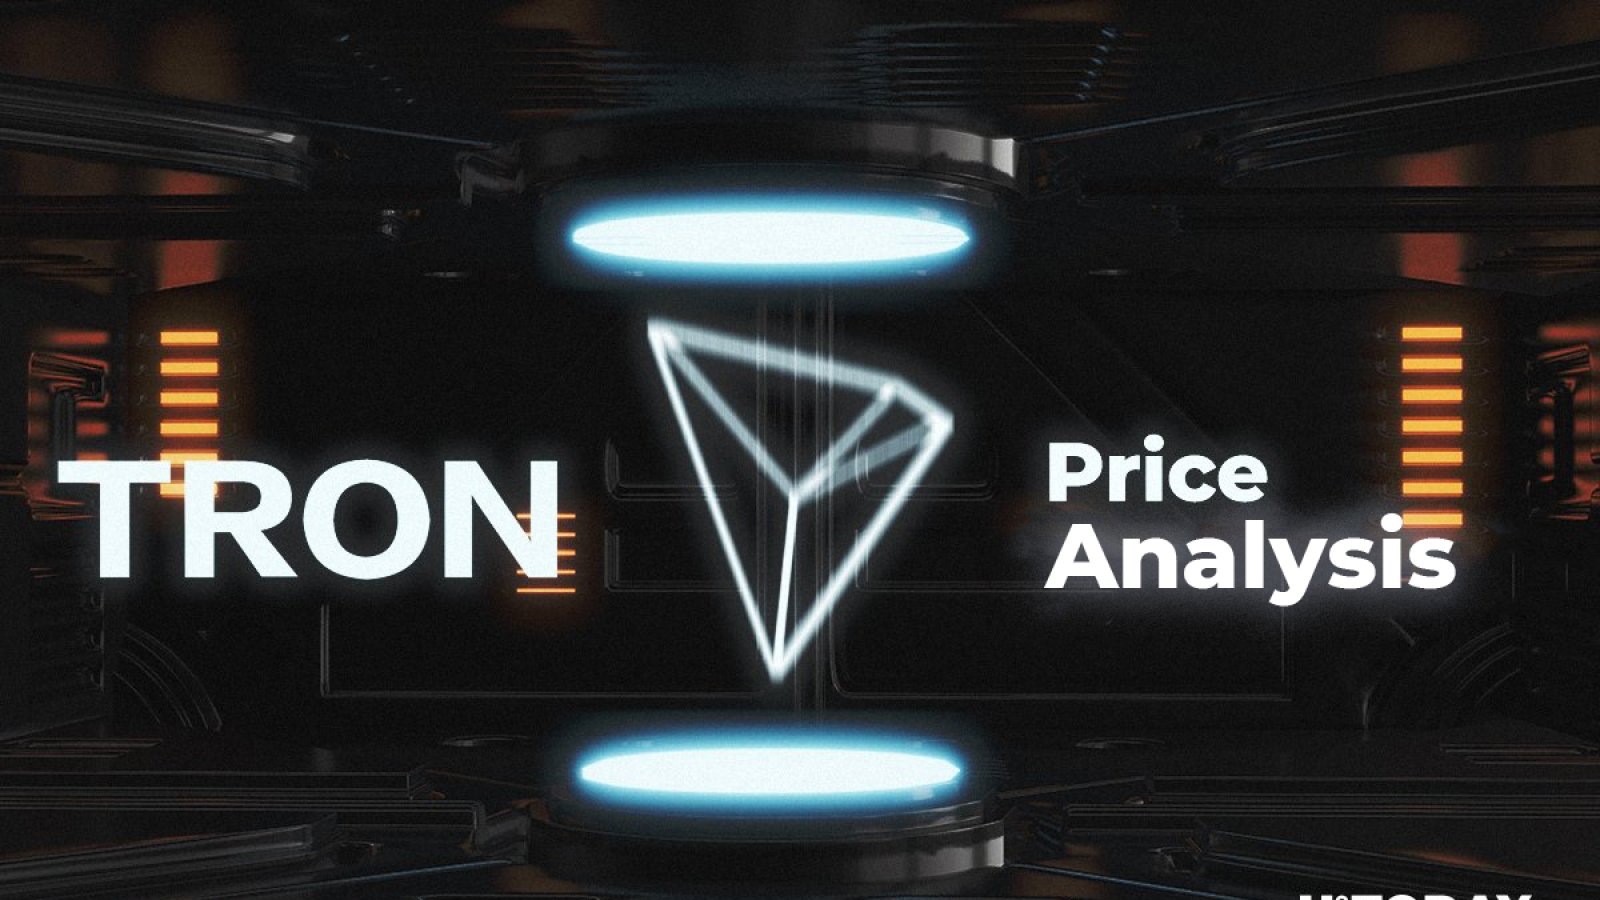 Tron Price Analysis - How Much Might TRX Be Worth in 2019\20\25?